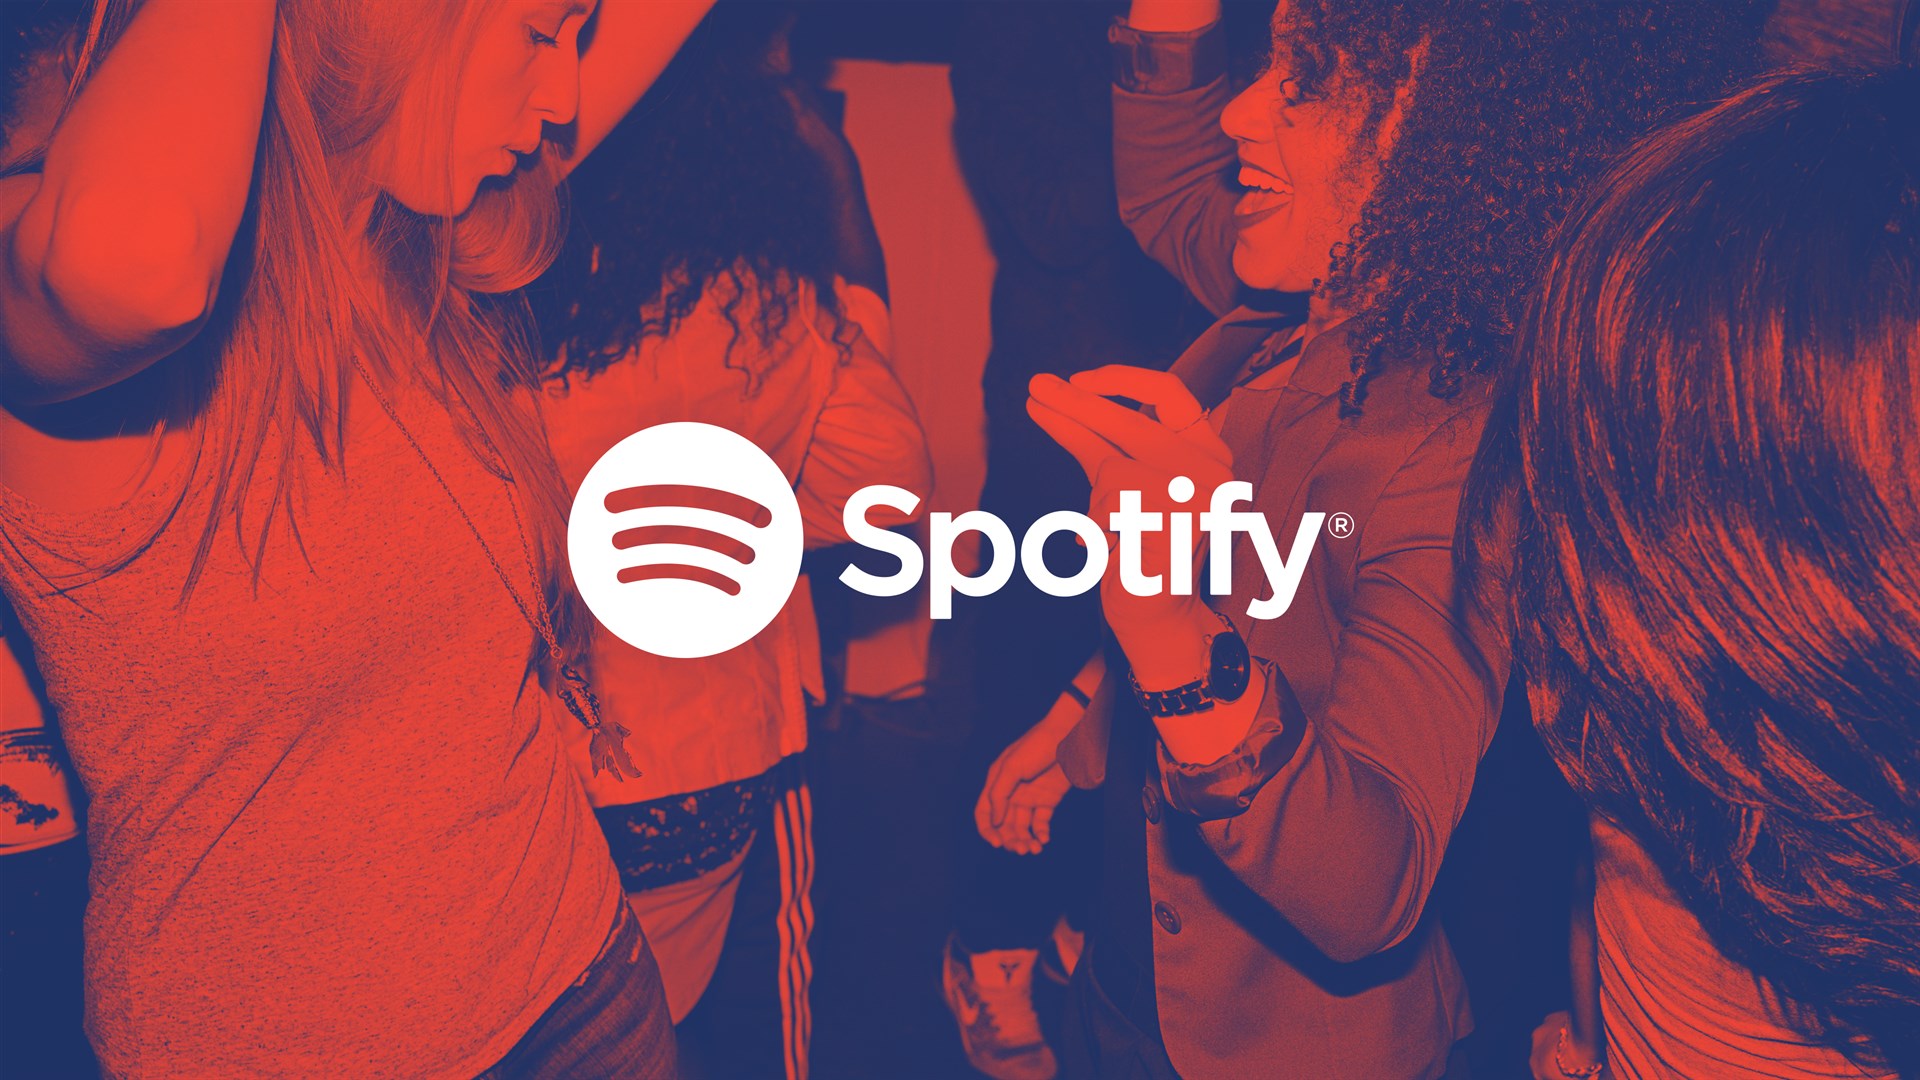 A photo of some people partying with a bunch of visual effects on it so it serves as a backdrop to the Spotify logo, which is plastered over the top of the image.